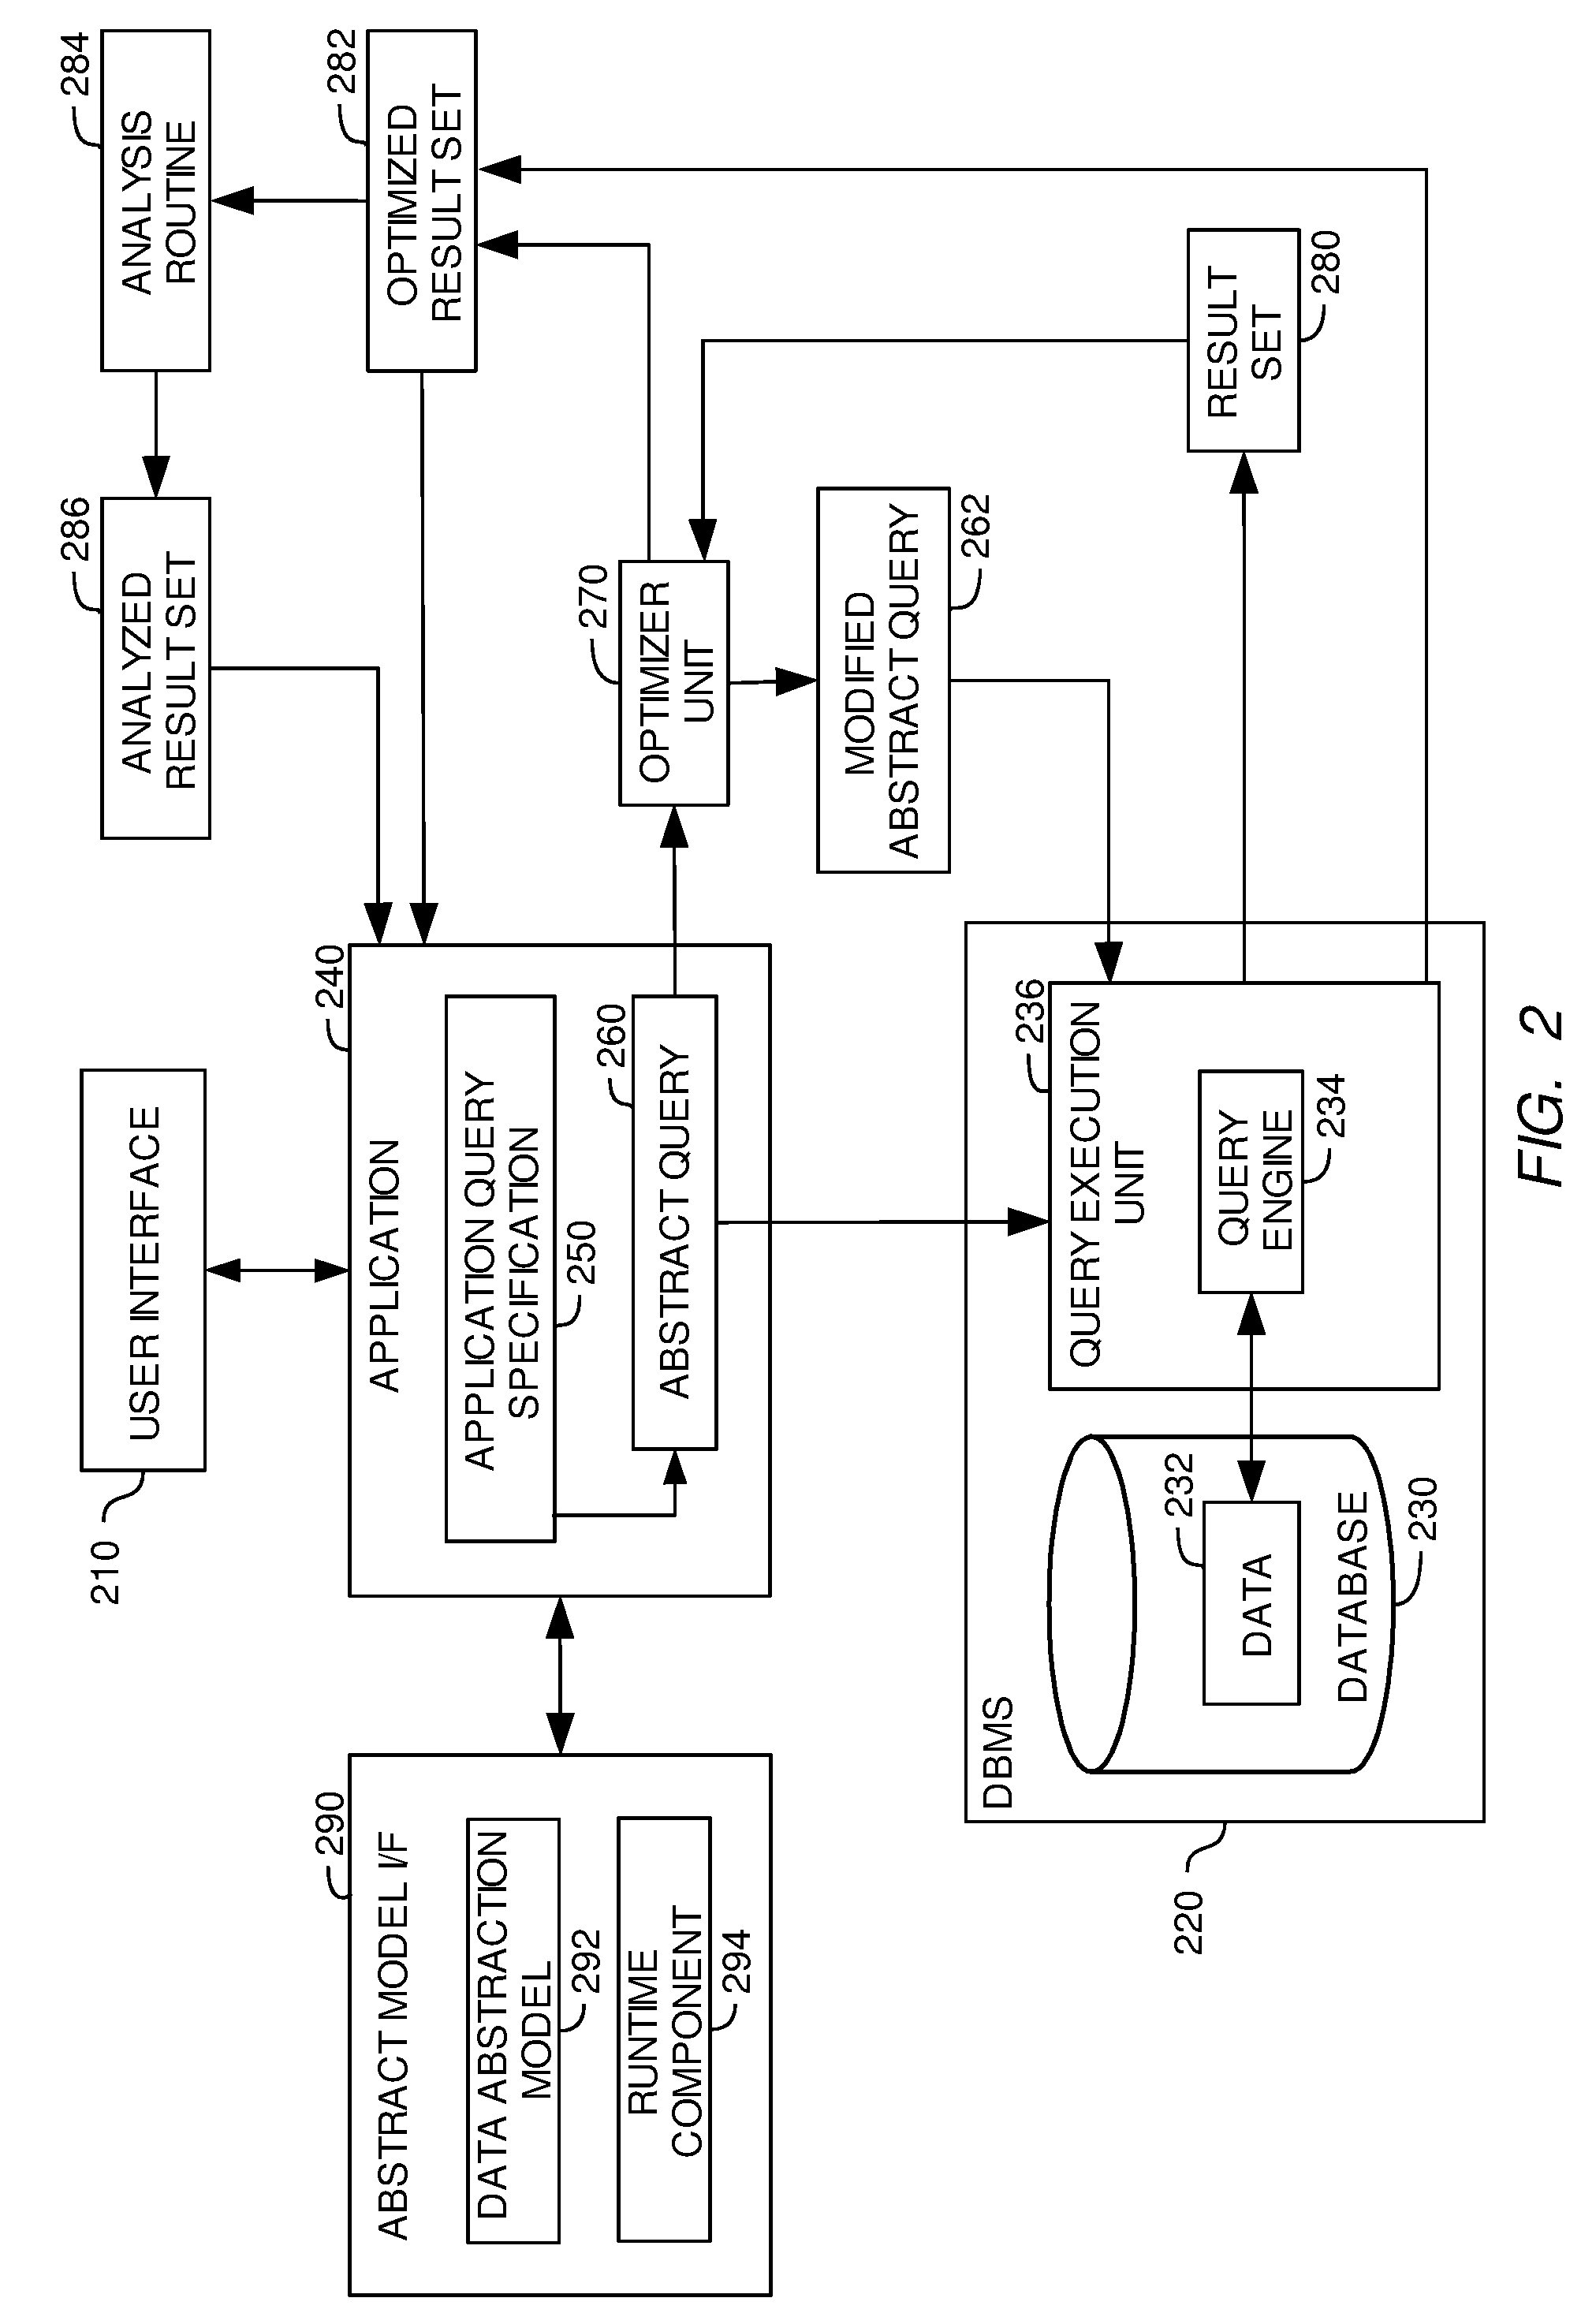 System and method for optimizing query results in an abstract data environment